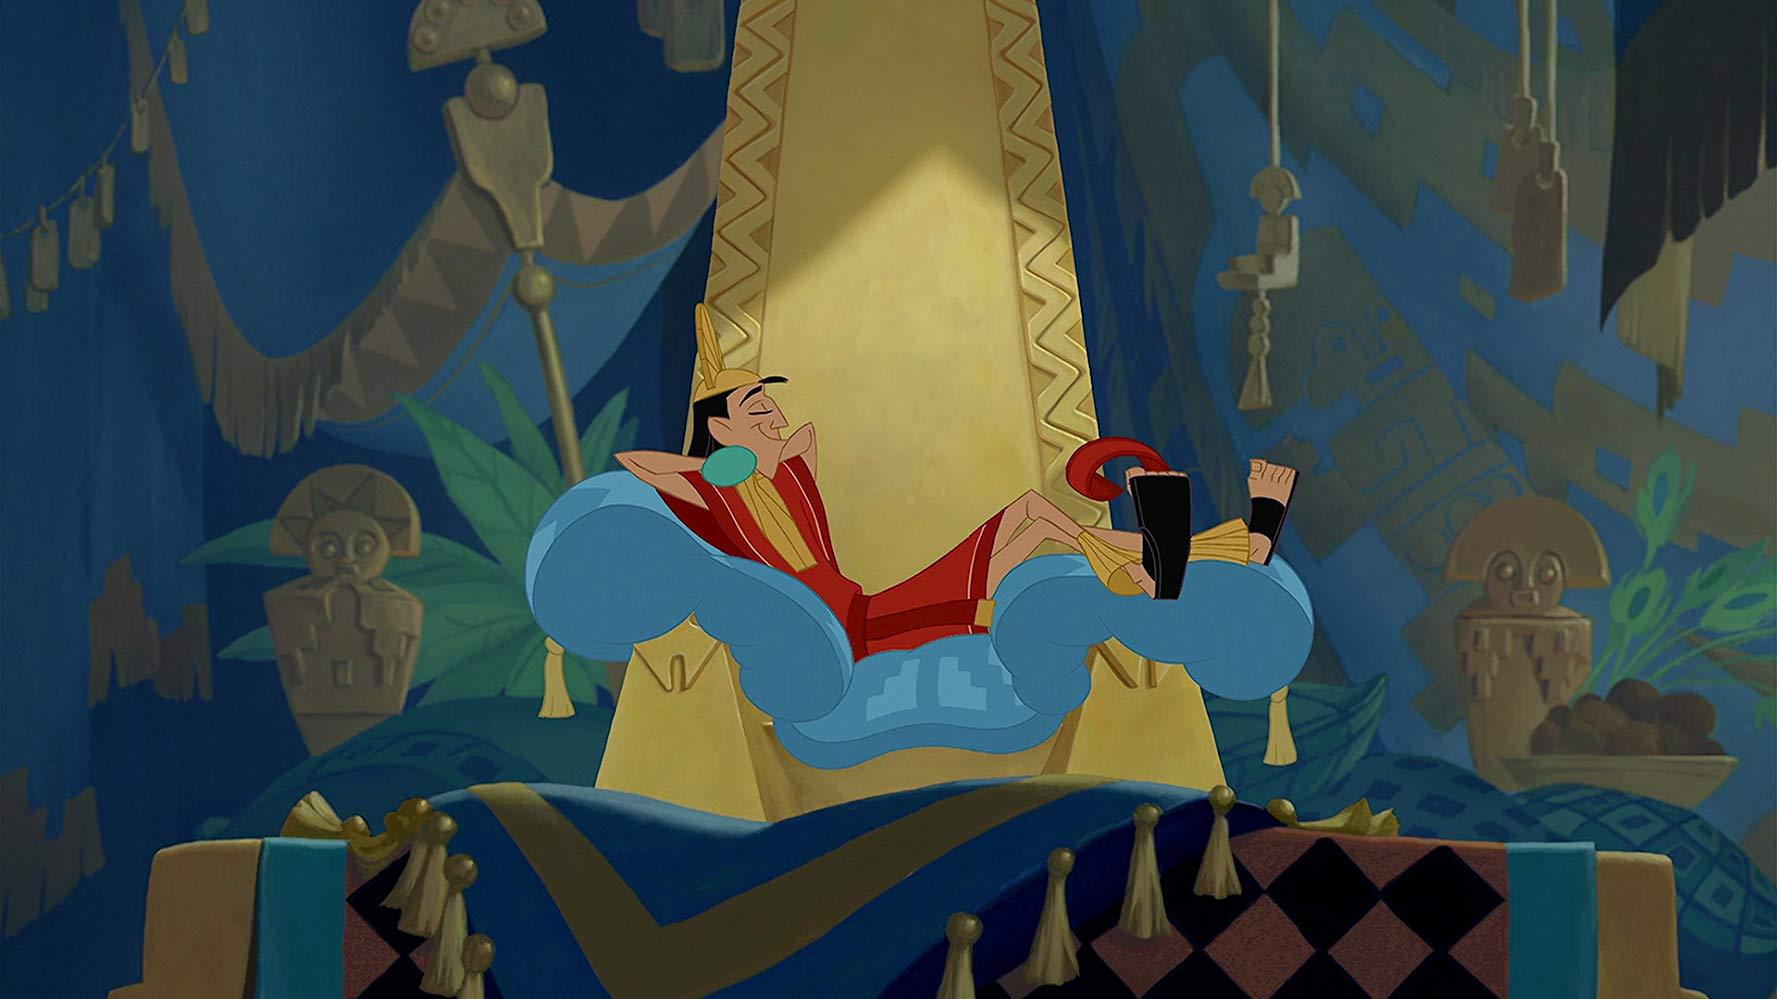 The Emperor's New Groove (2000)